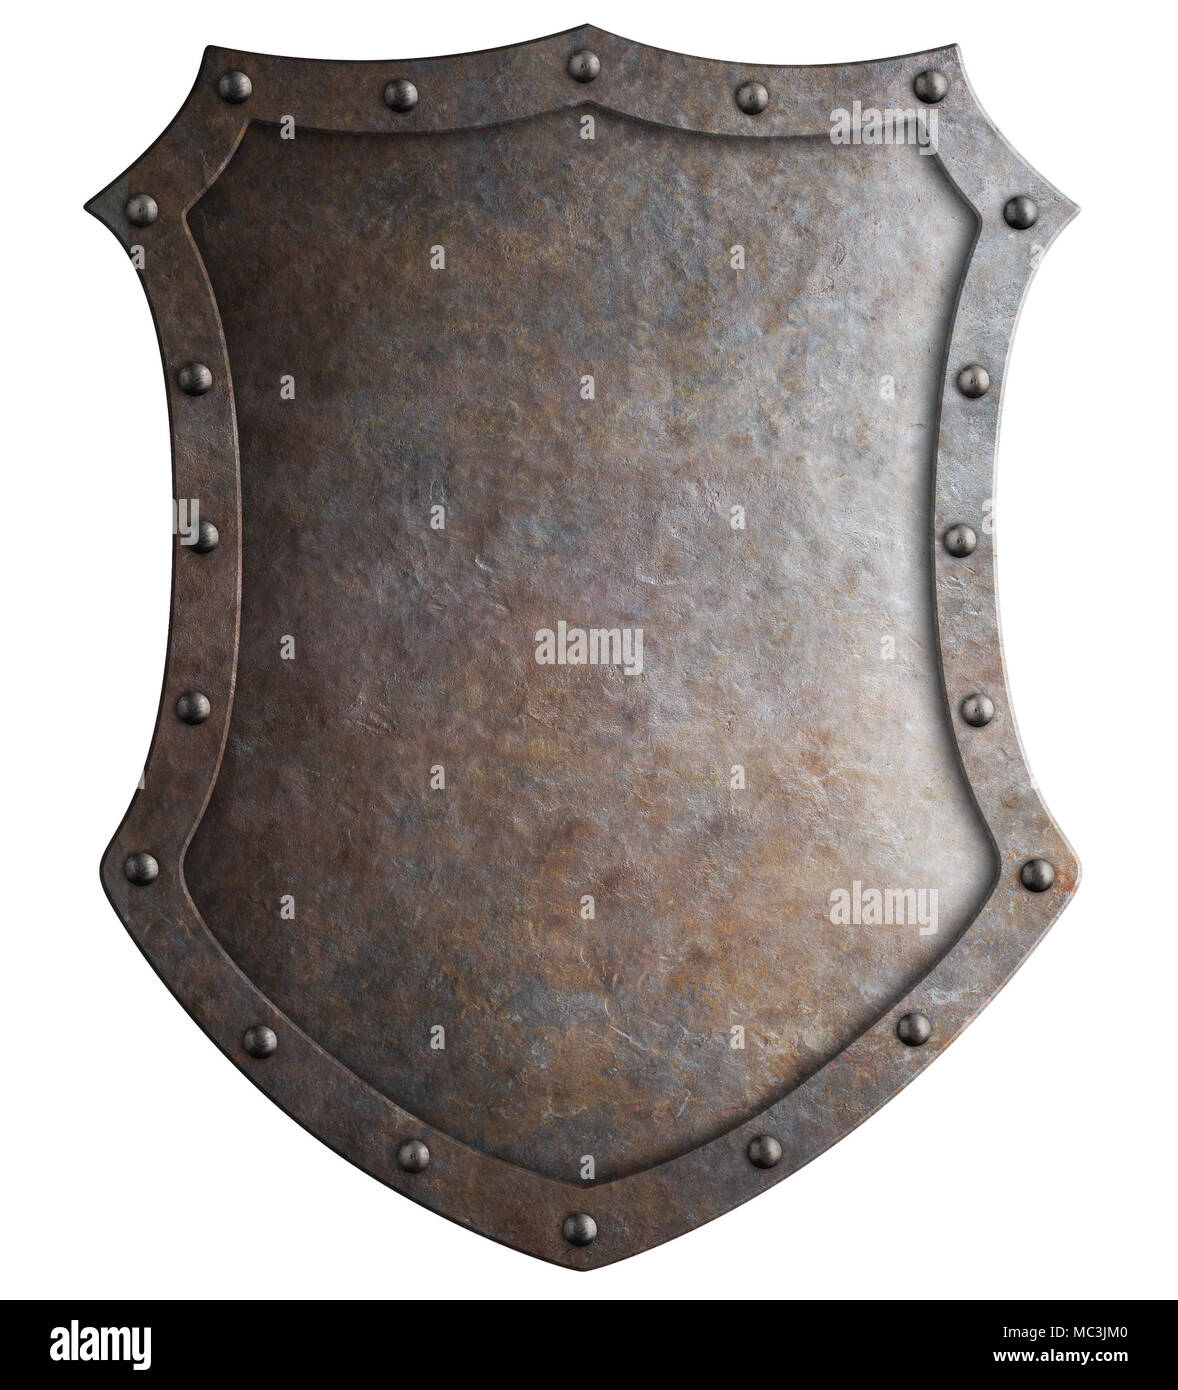 Metal medieval tall shield or coat of arms isolated 3d illustration Stock Photo